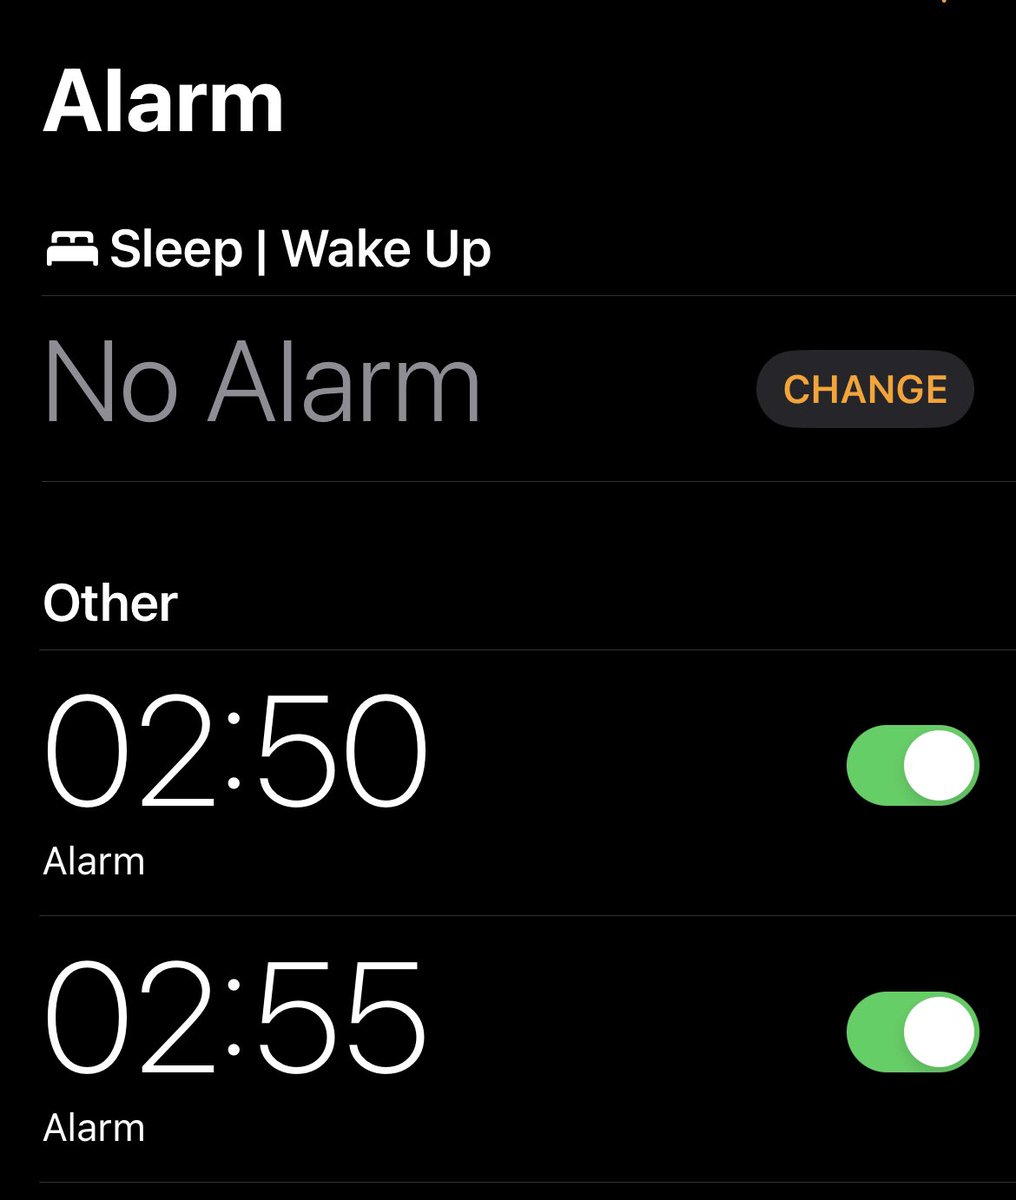 Setting the 2.50am alarm for one last time! Final Talk Today show with @drdavidbull @talktv tomorrow from 6am. Come and say hi/bye! X